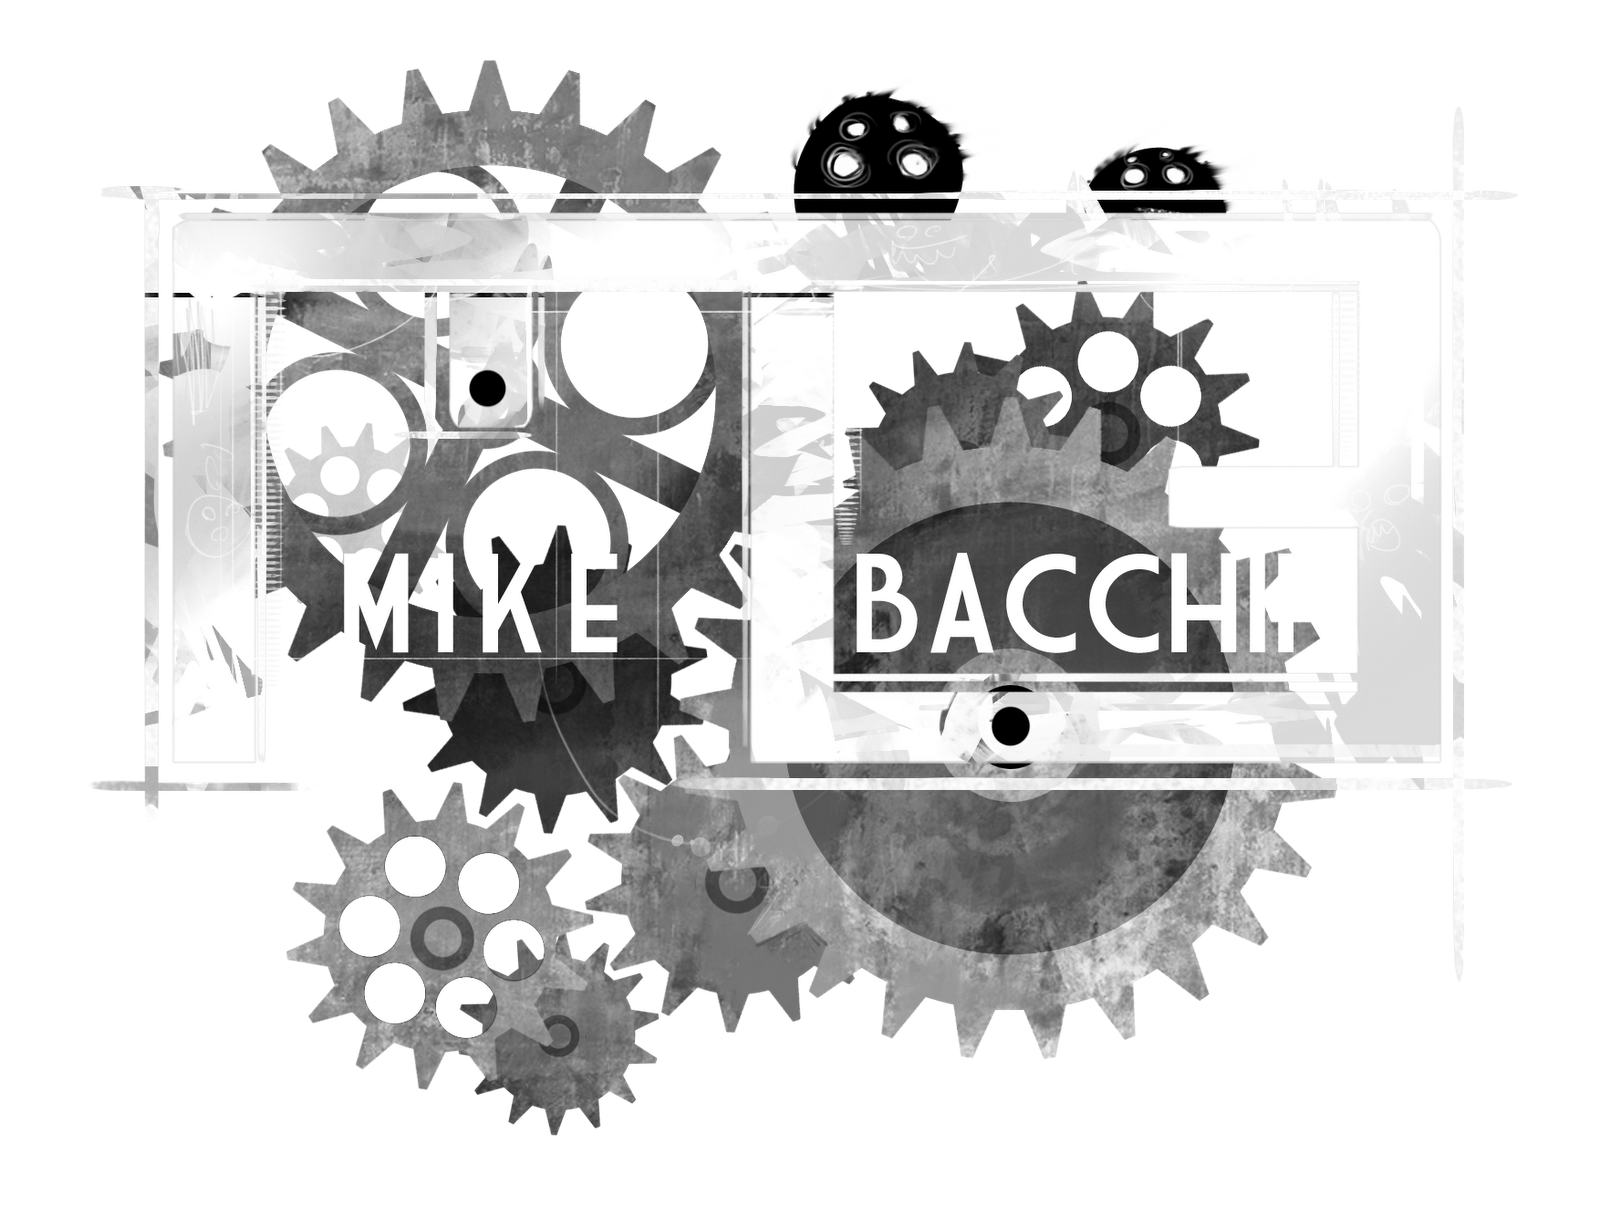 The art of Mike Bacchin